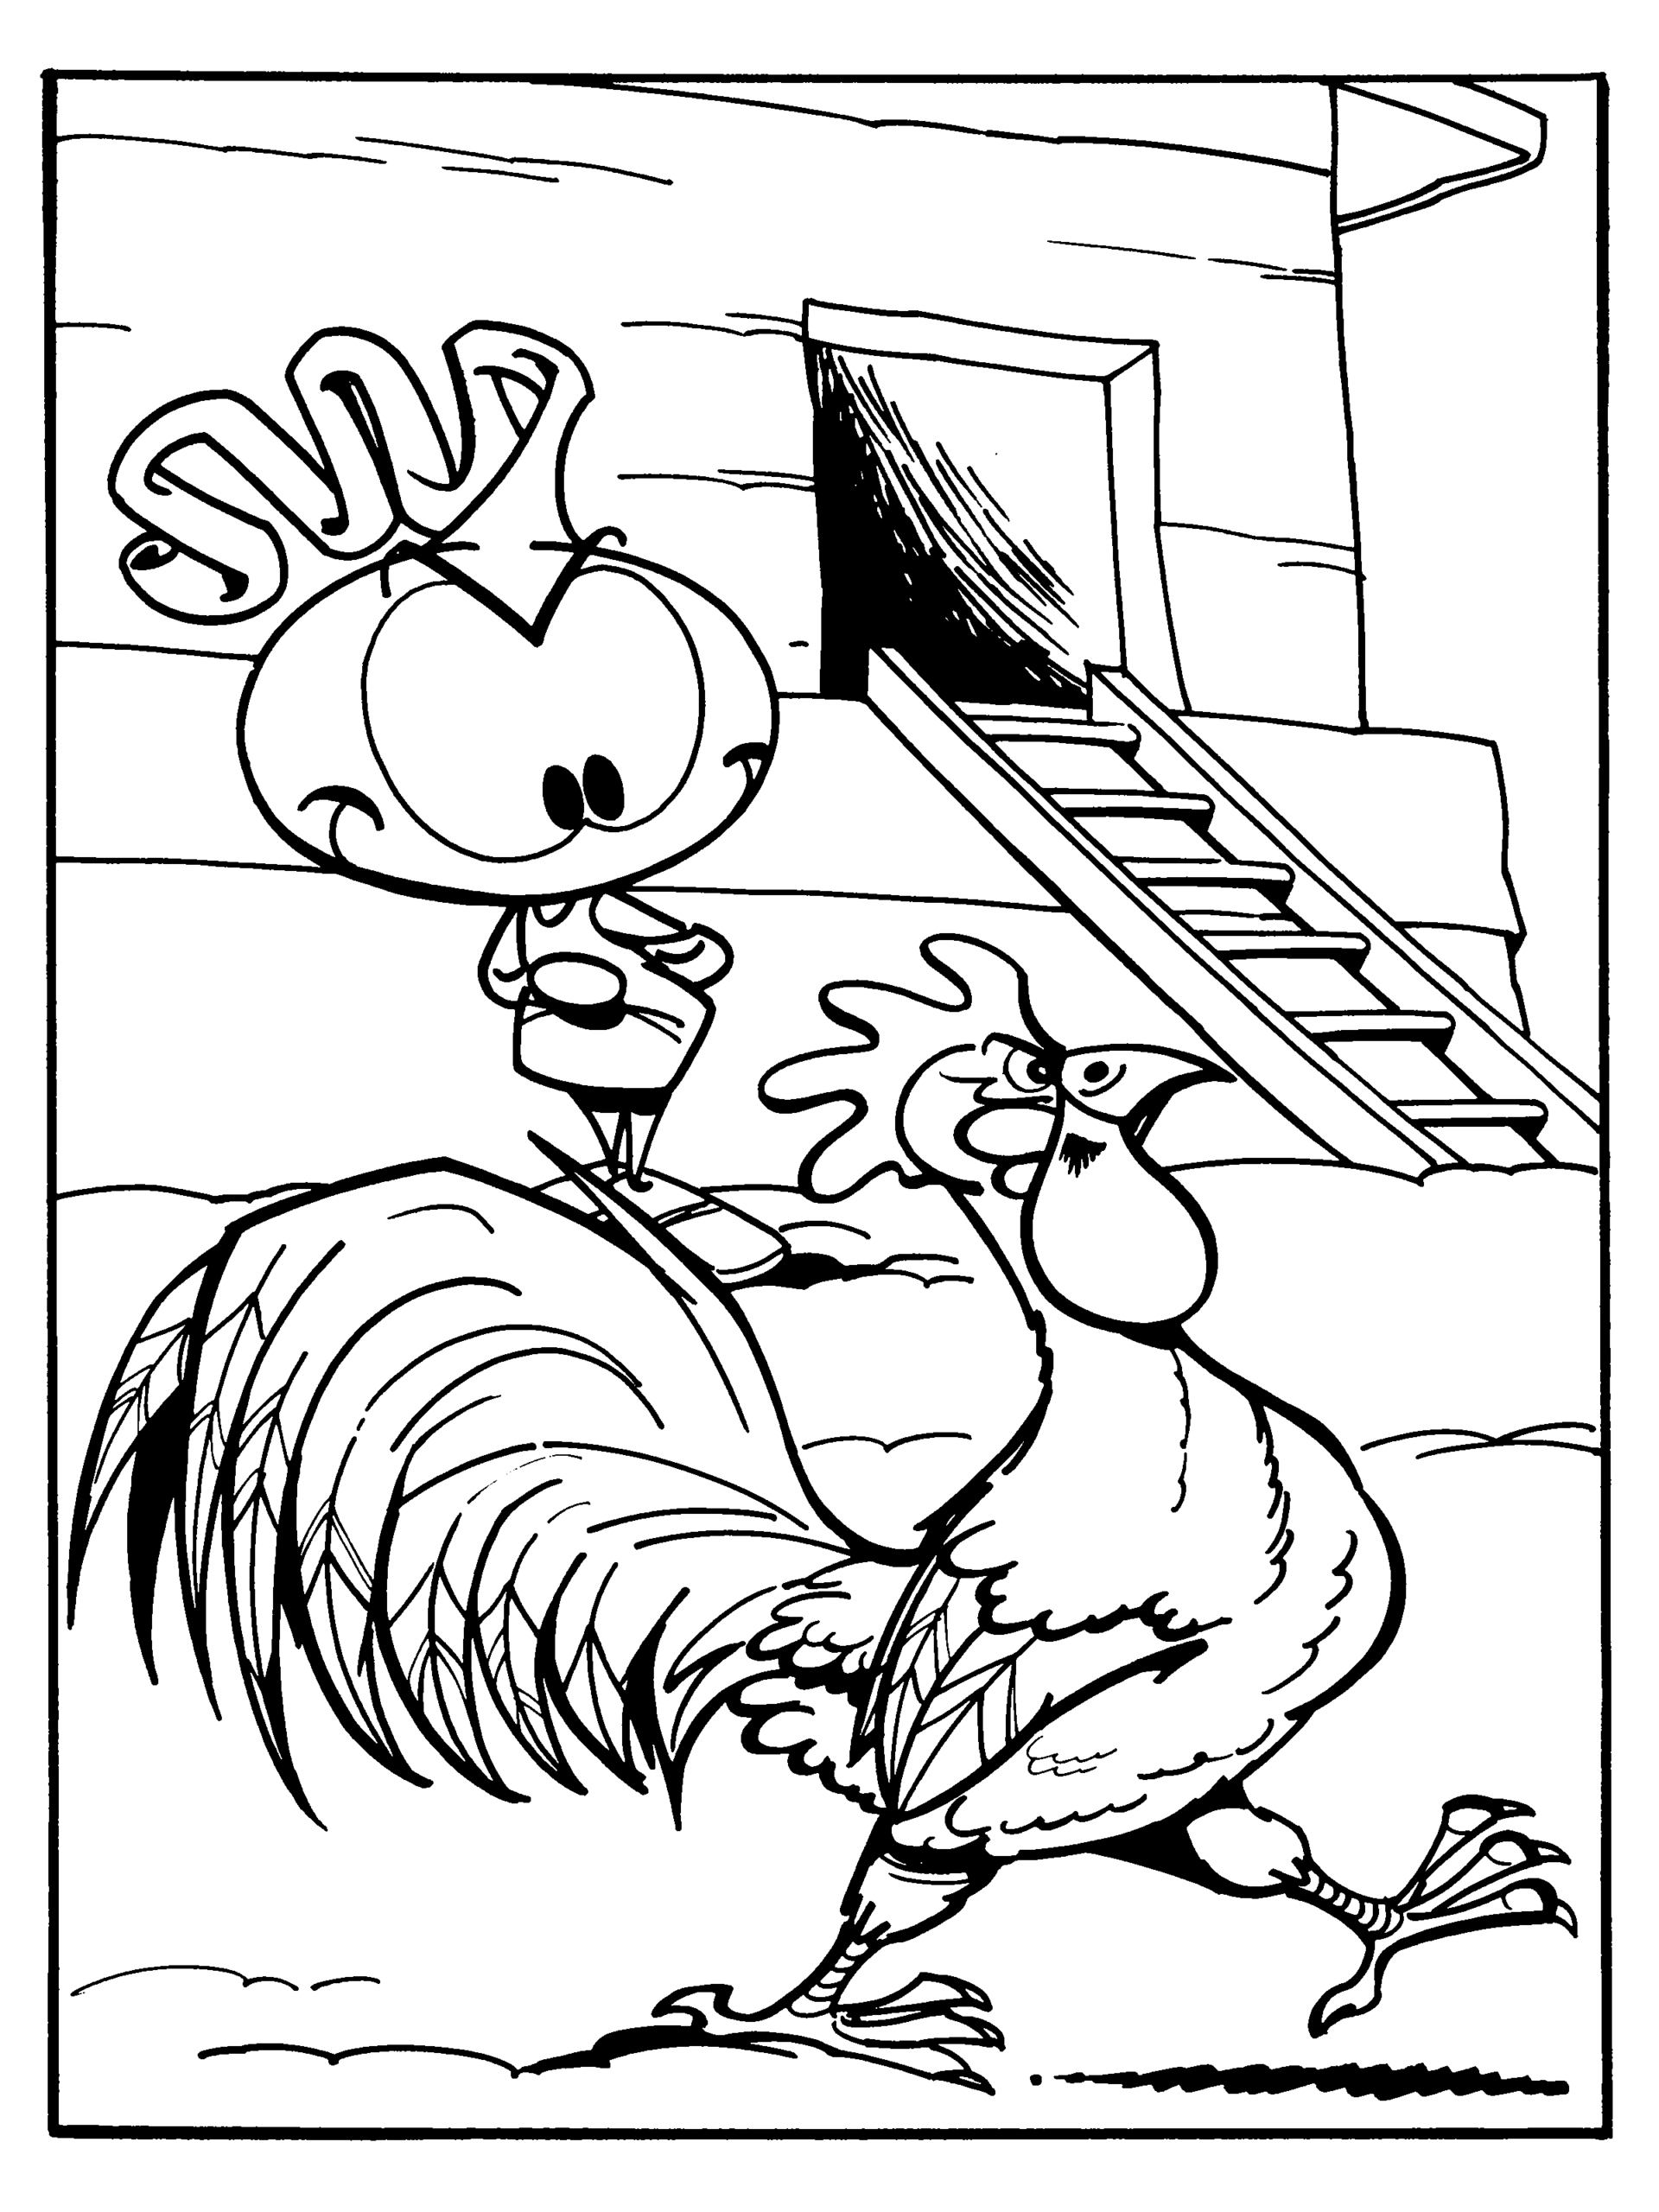 Snorks Coloring Pages TV Film snorks 19 Printable 2020 07651 Coloring4free